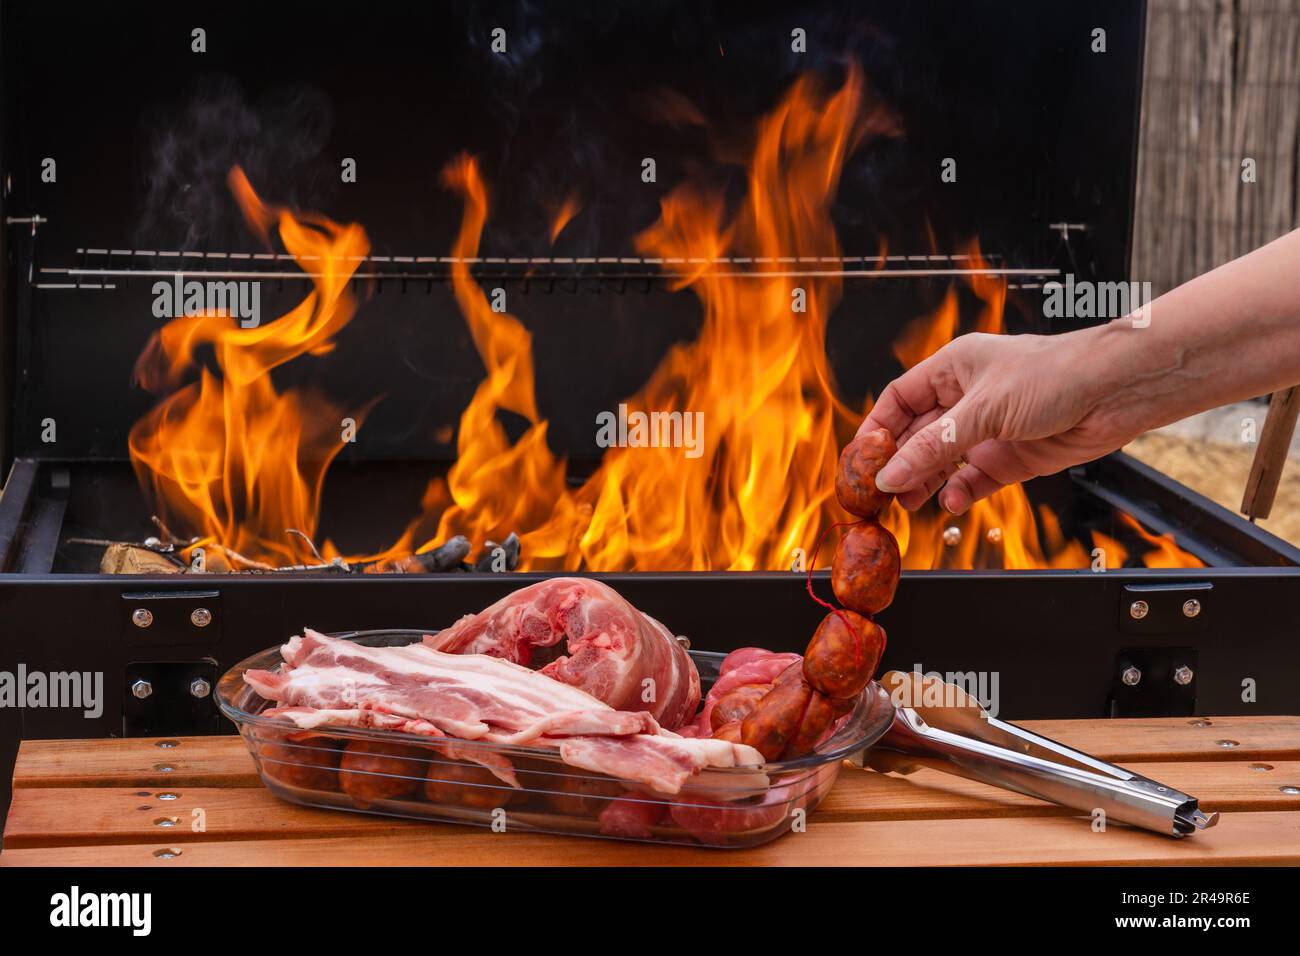 A hand near an array of raw meats and sausage near a burning grill with flames Stock Photo